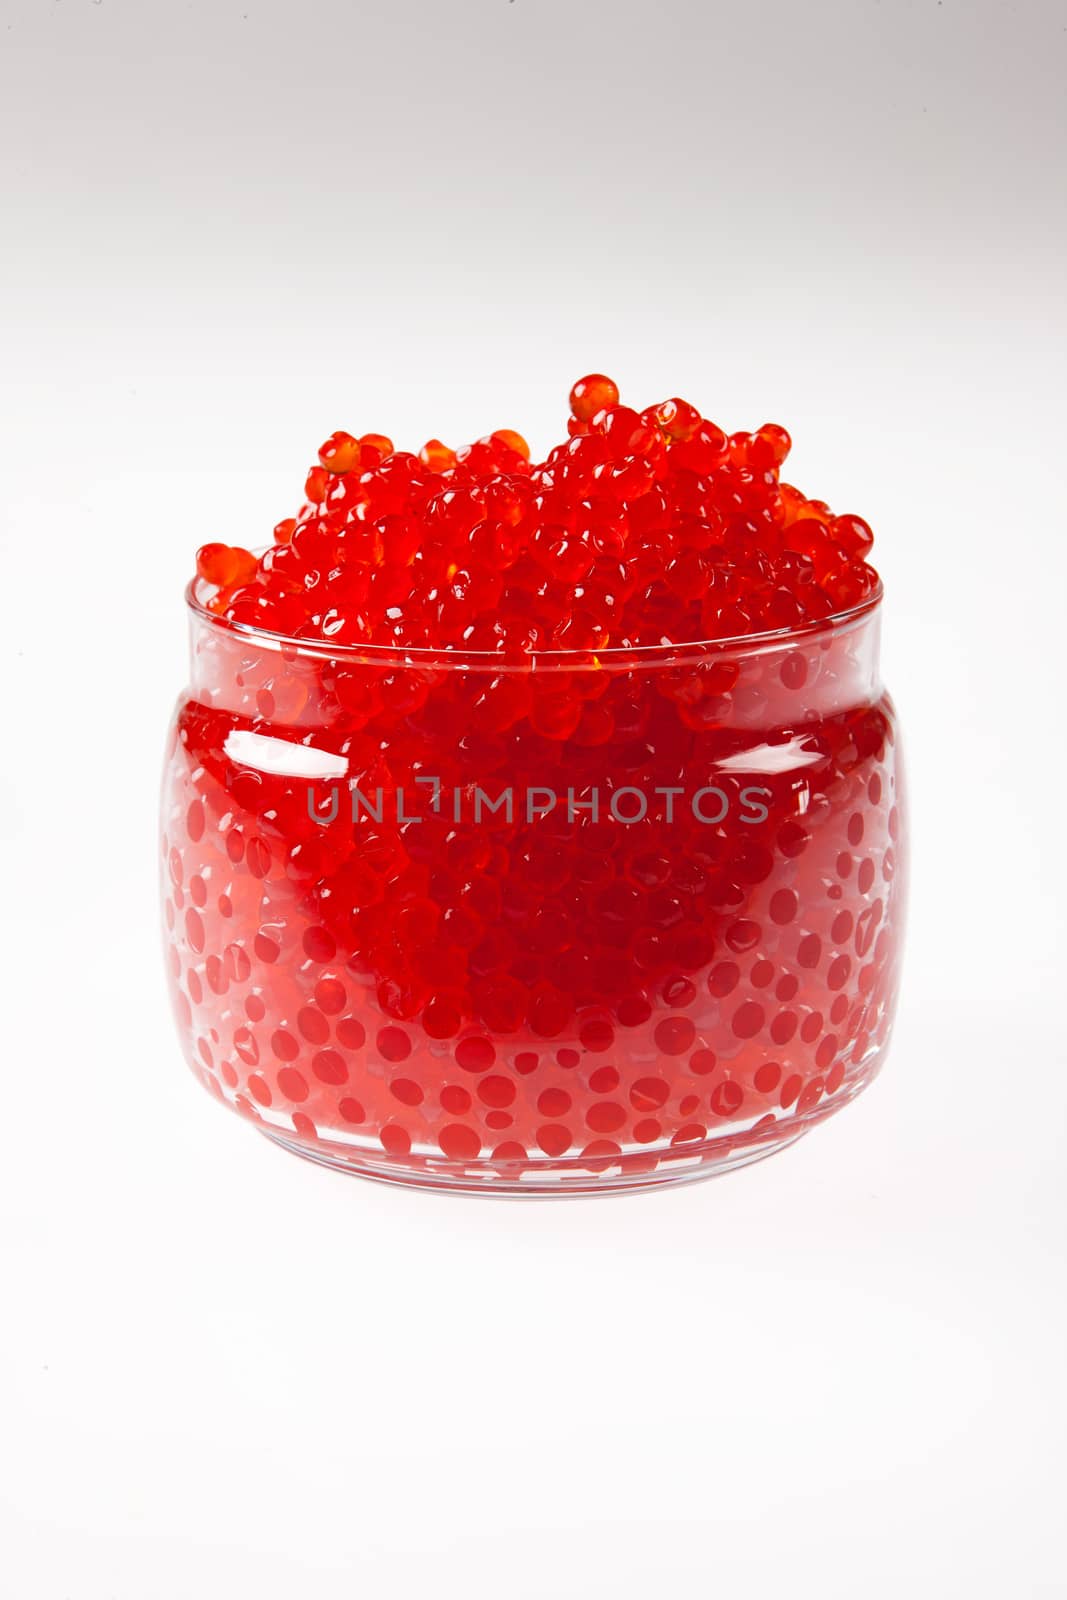 Red caviar on an isolated studio background